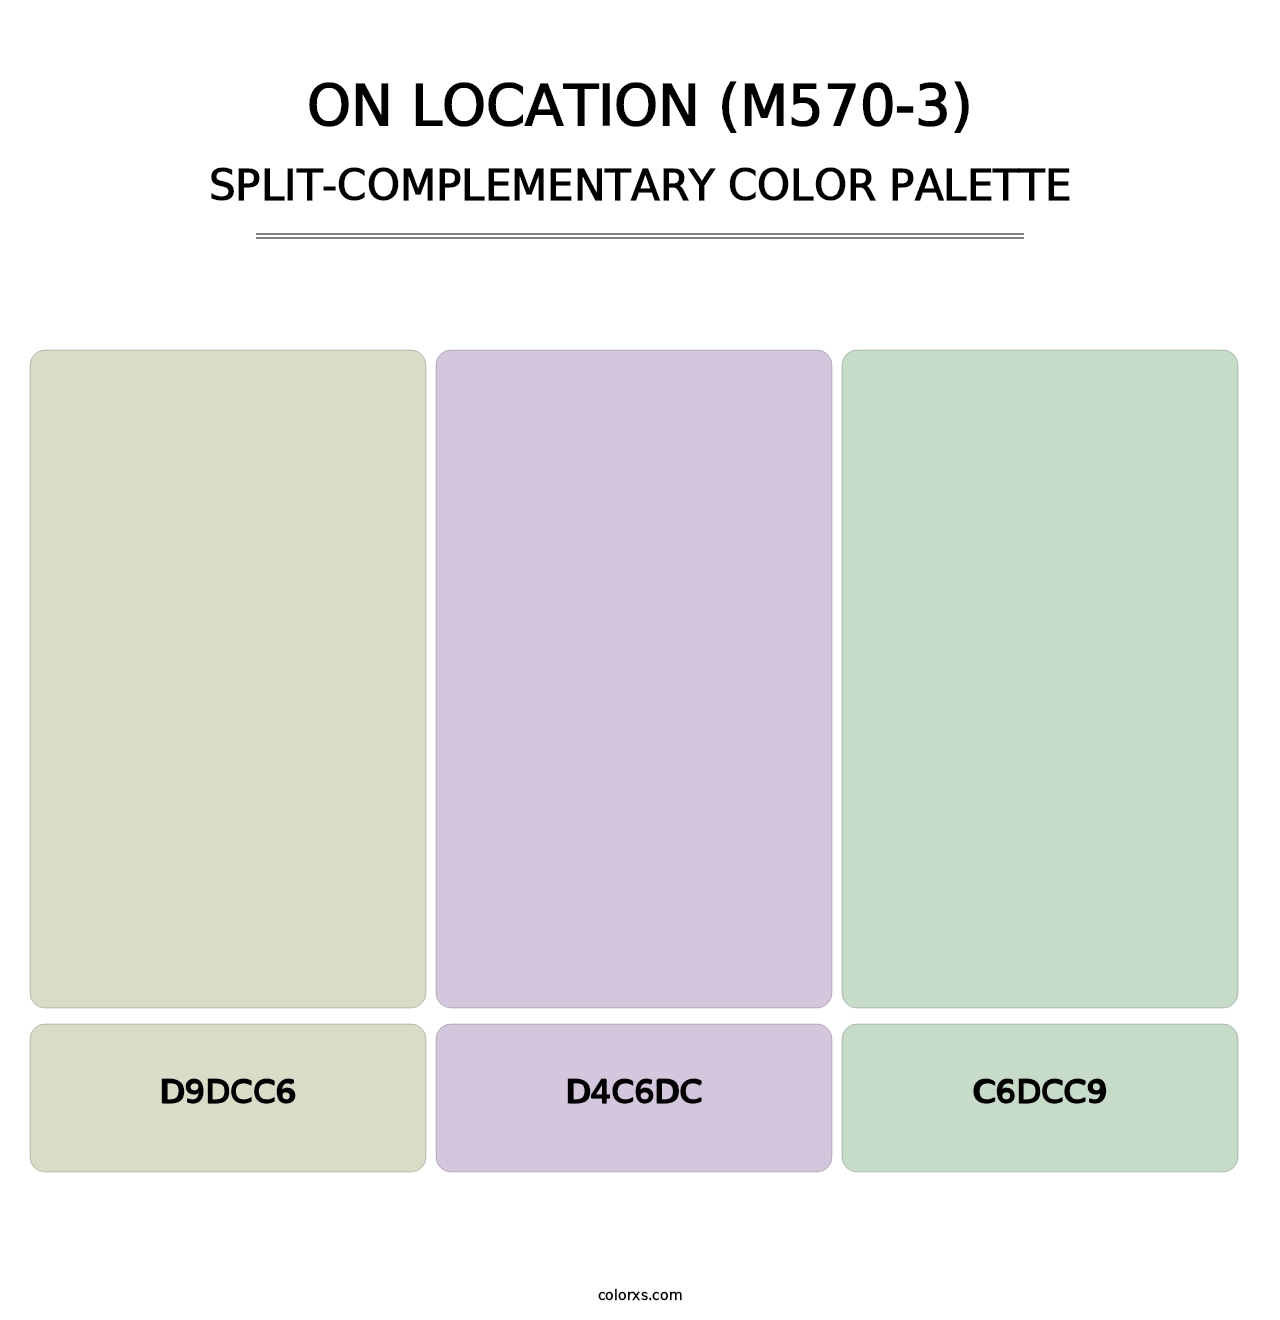 On Location (M570-3) - Split-Complementary Color Palette